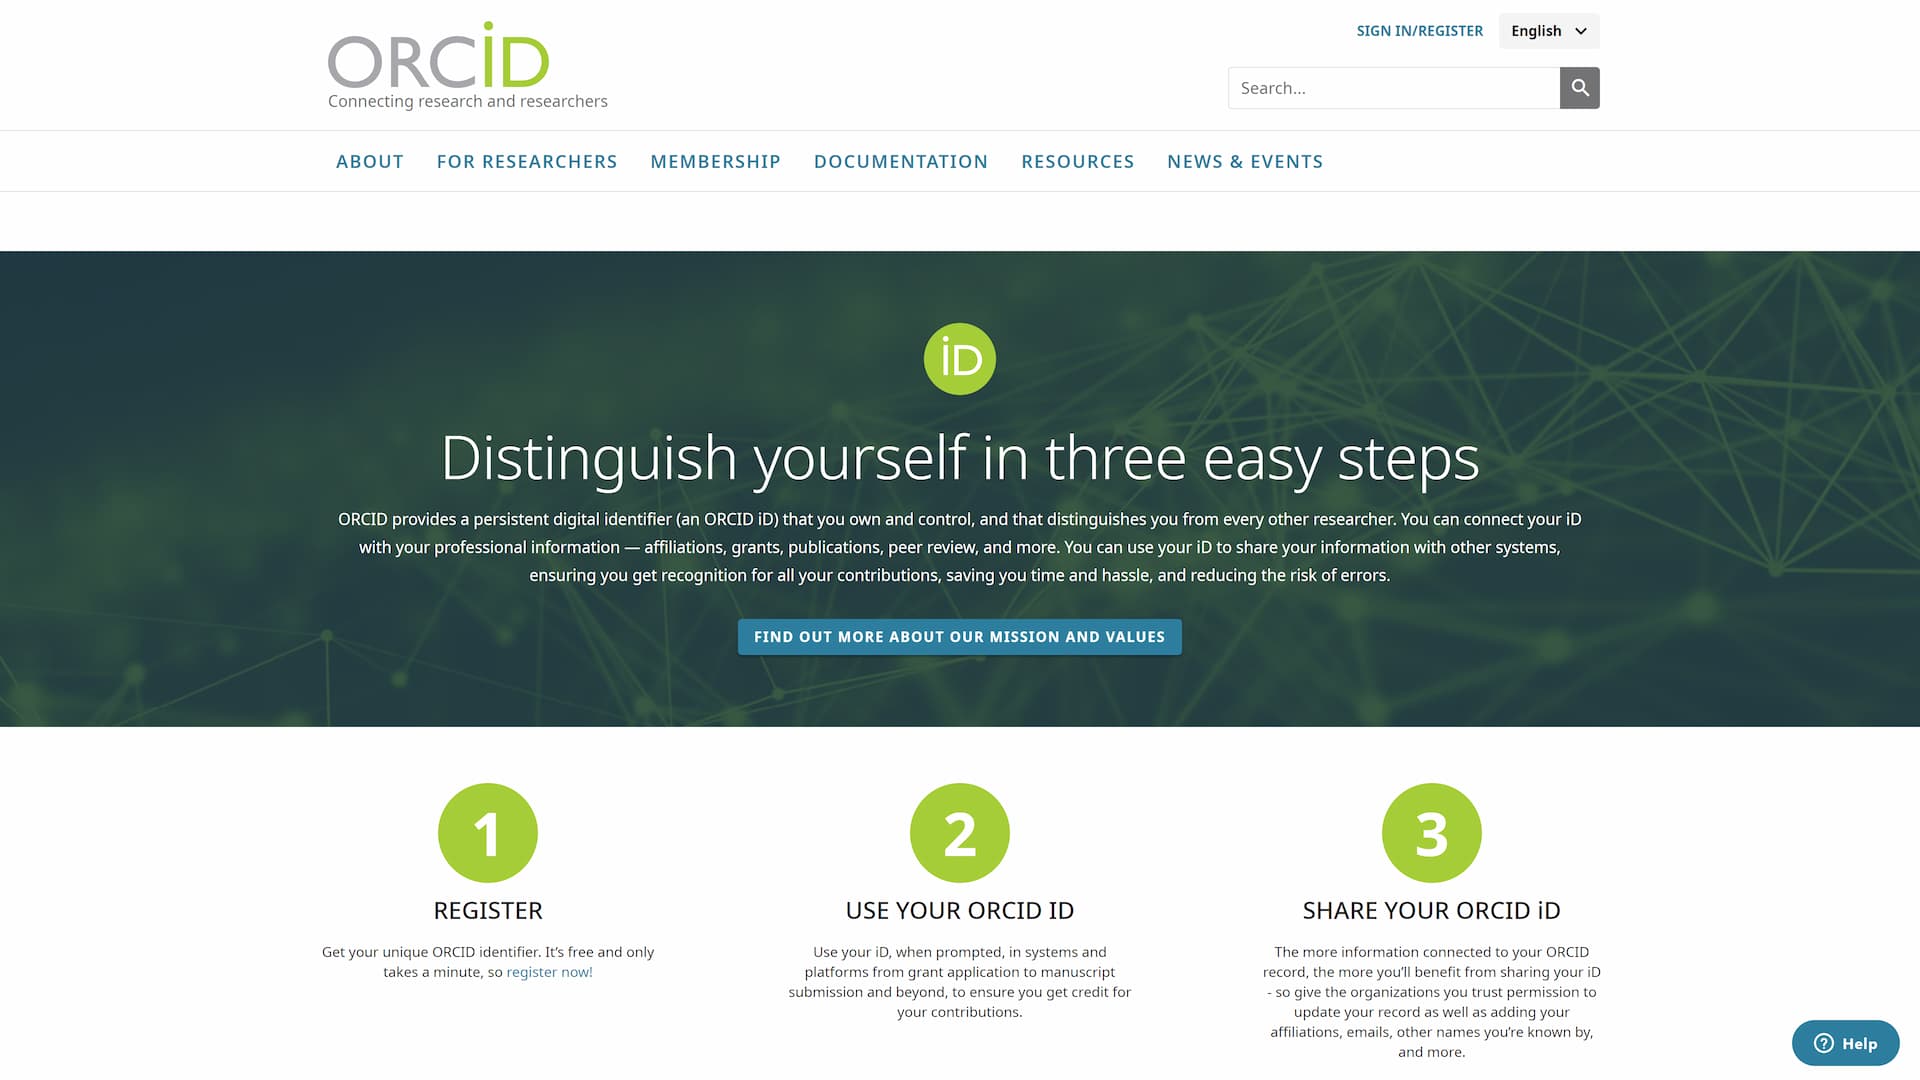 ORCID homepage